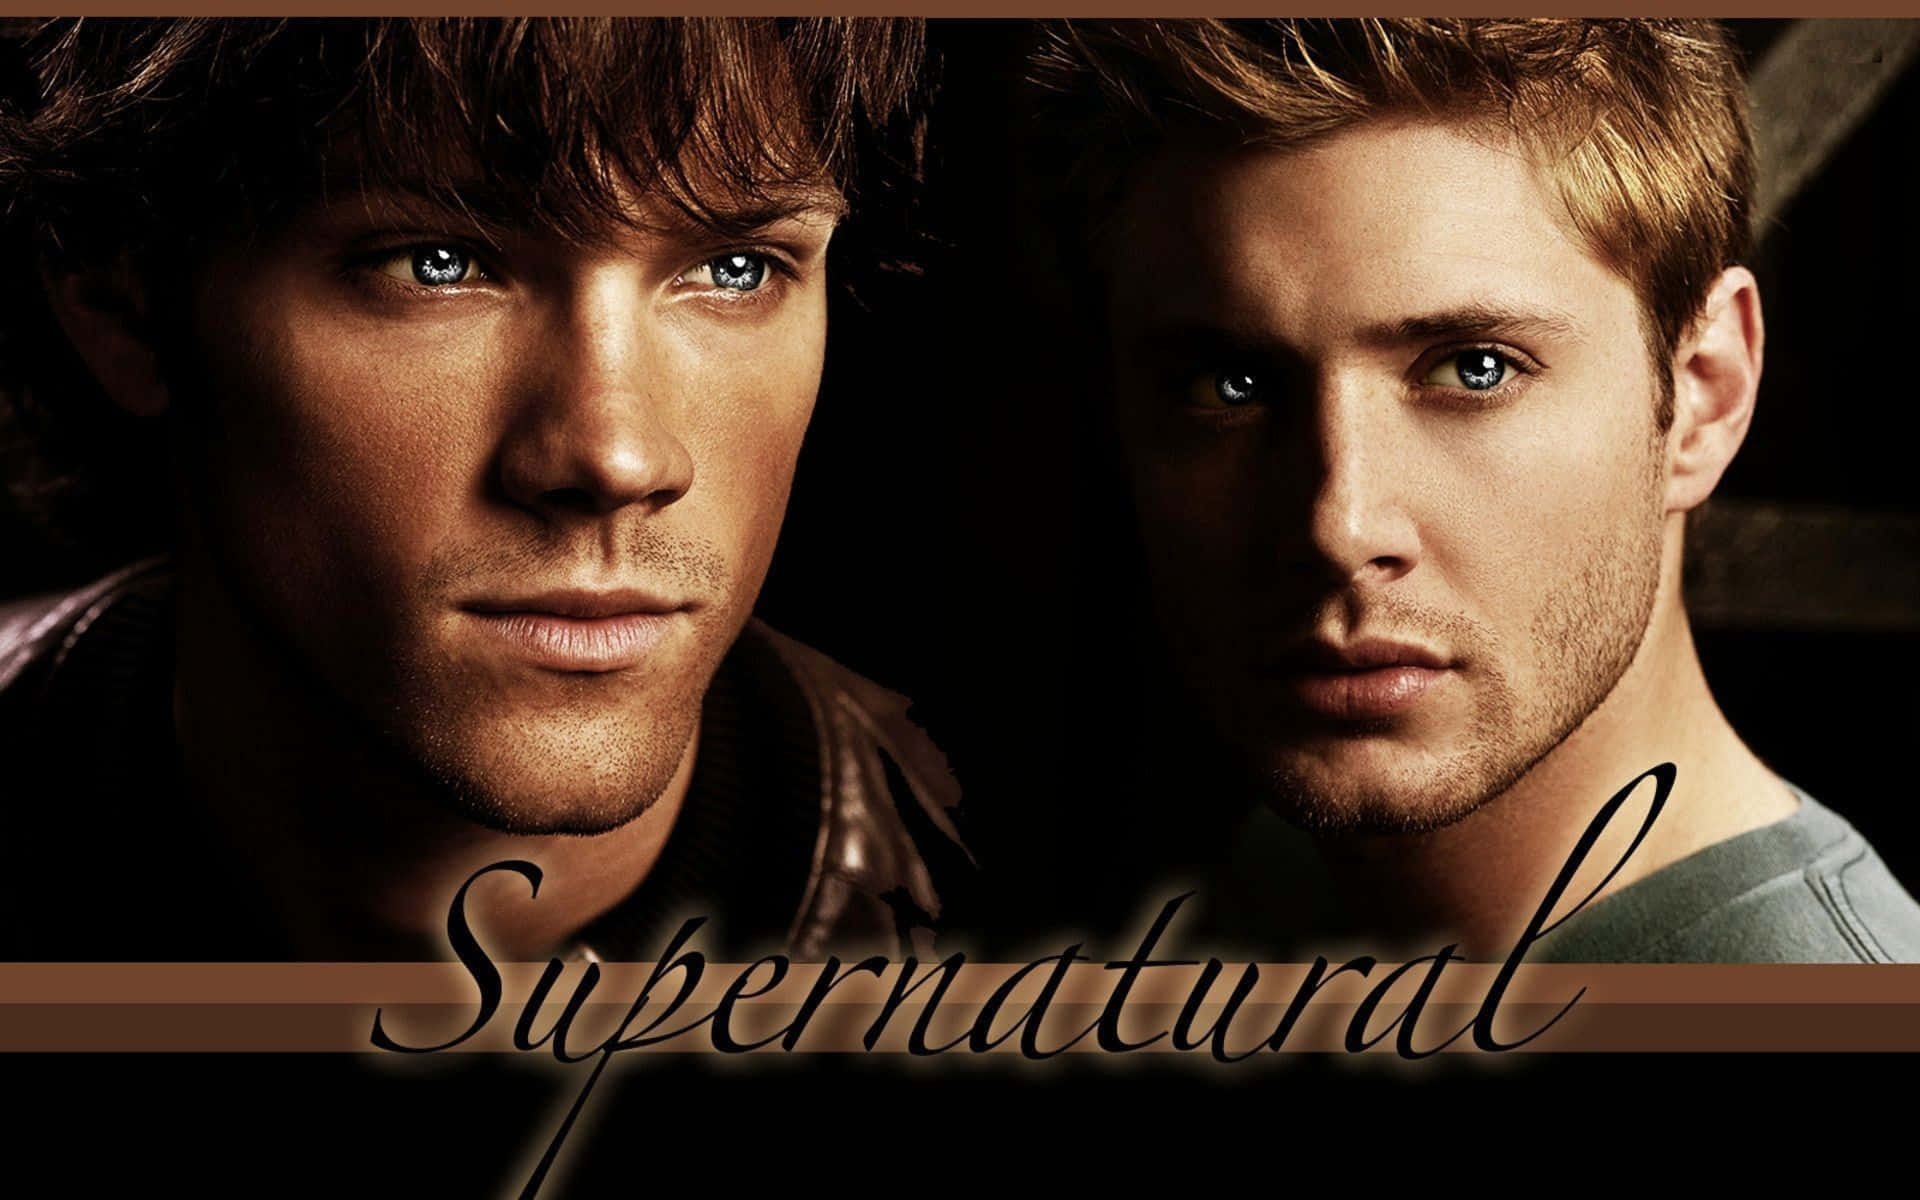 Sam and Dean Winchester from the hit TV show Supernatural